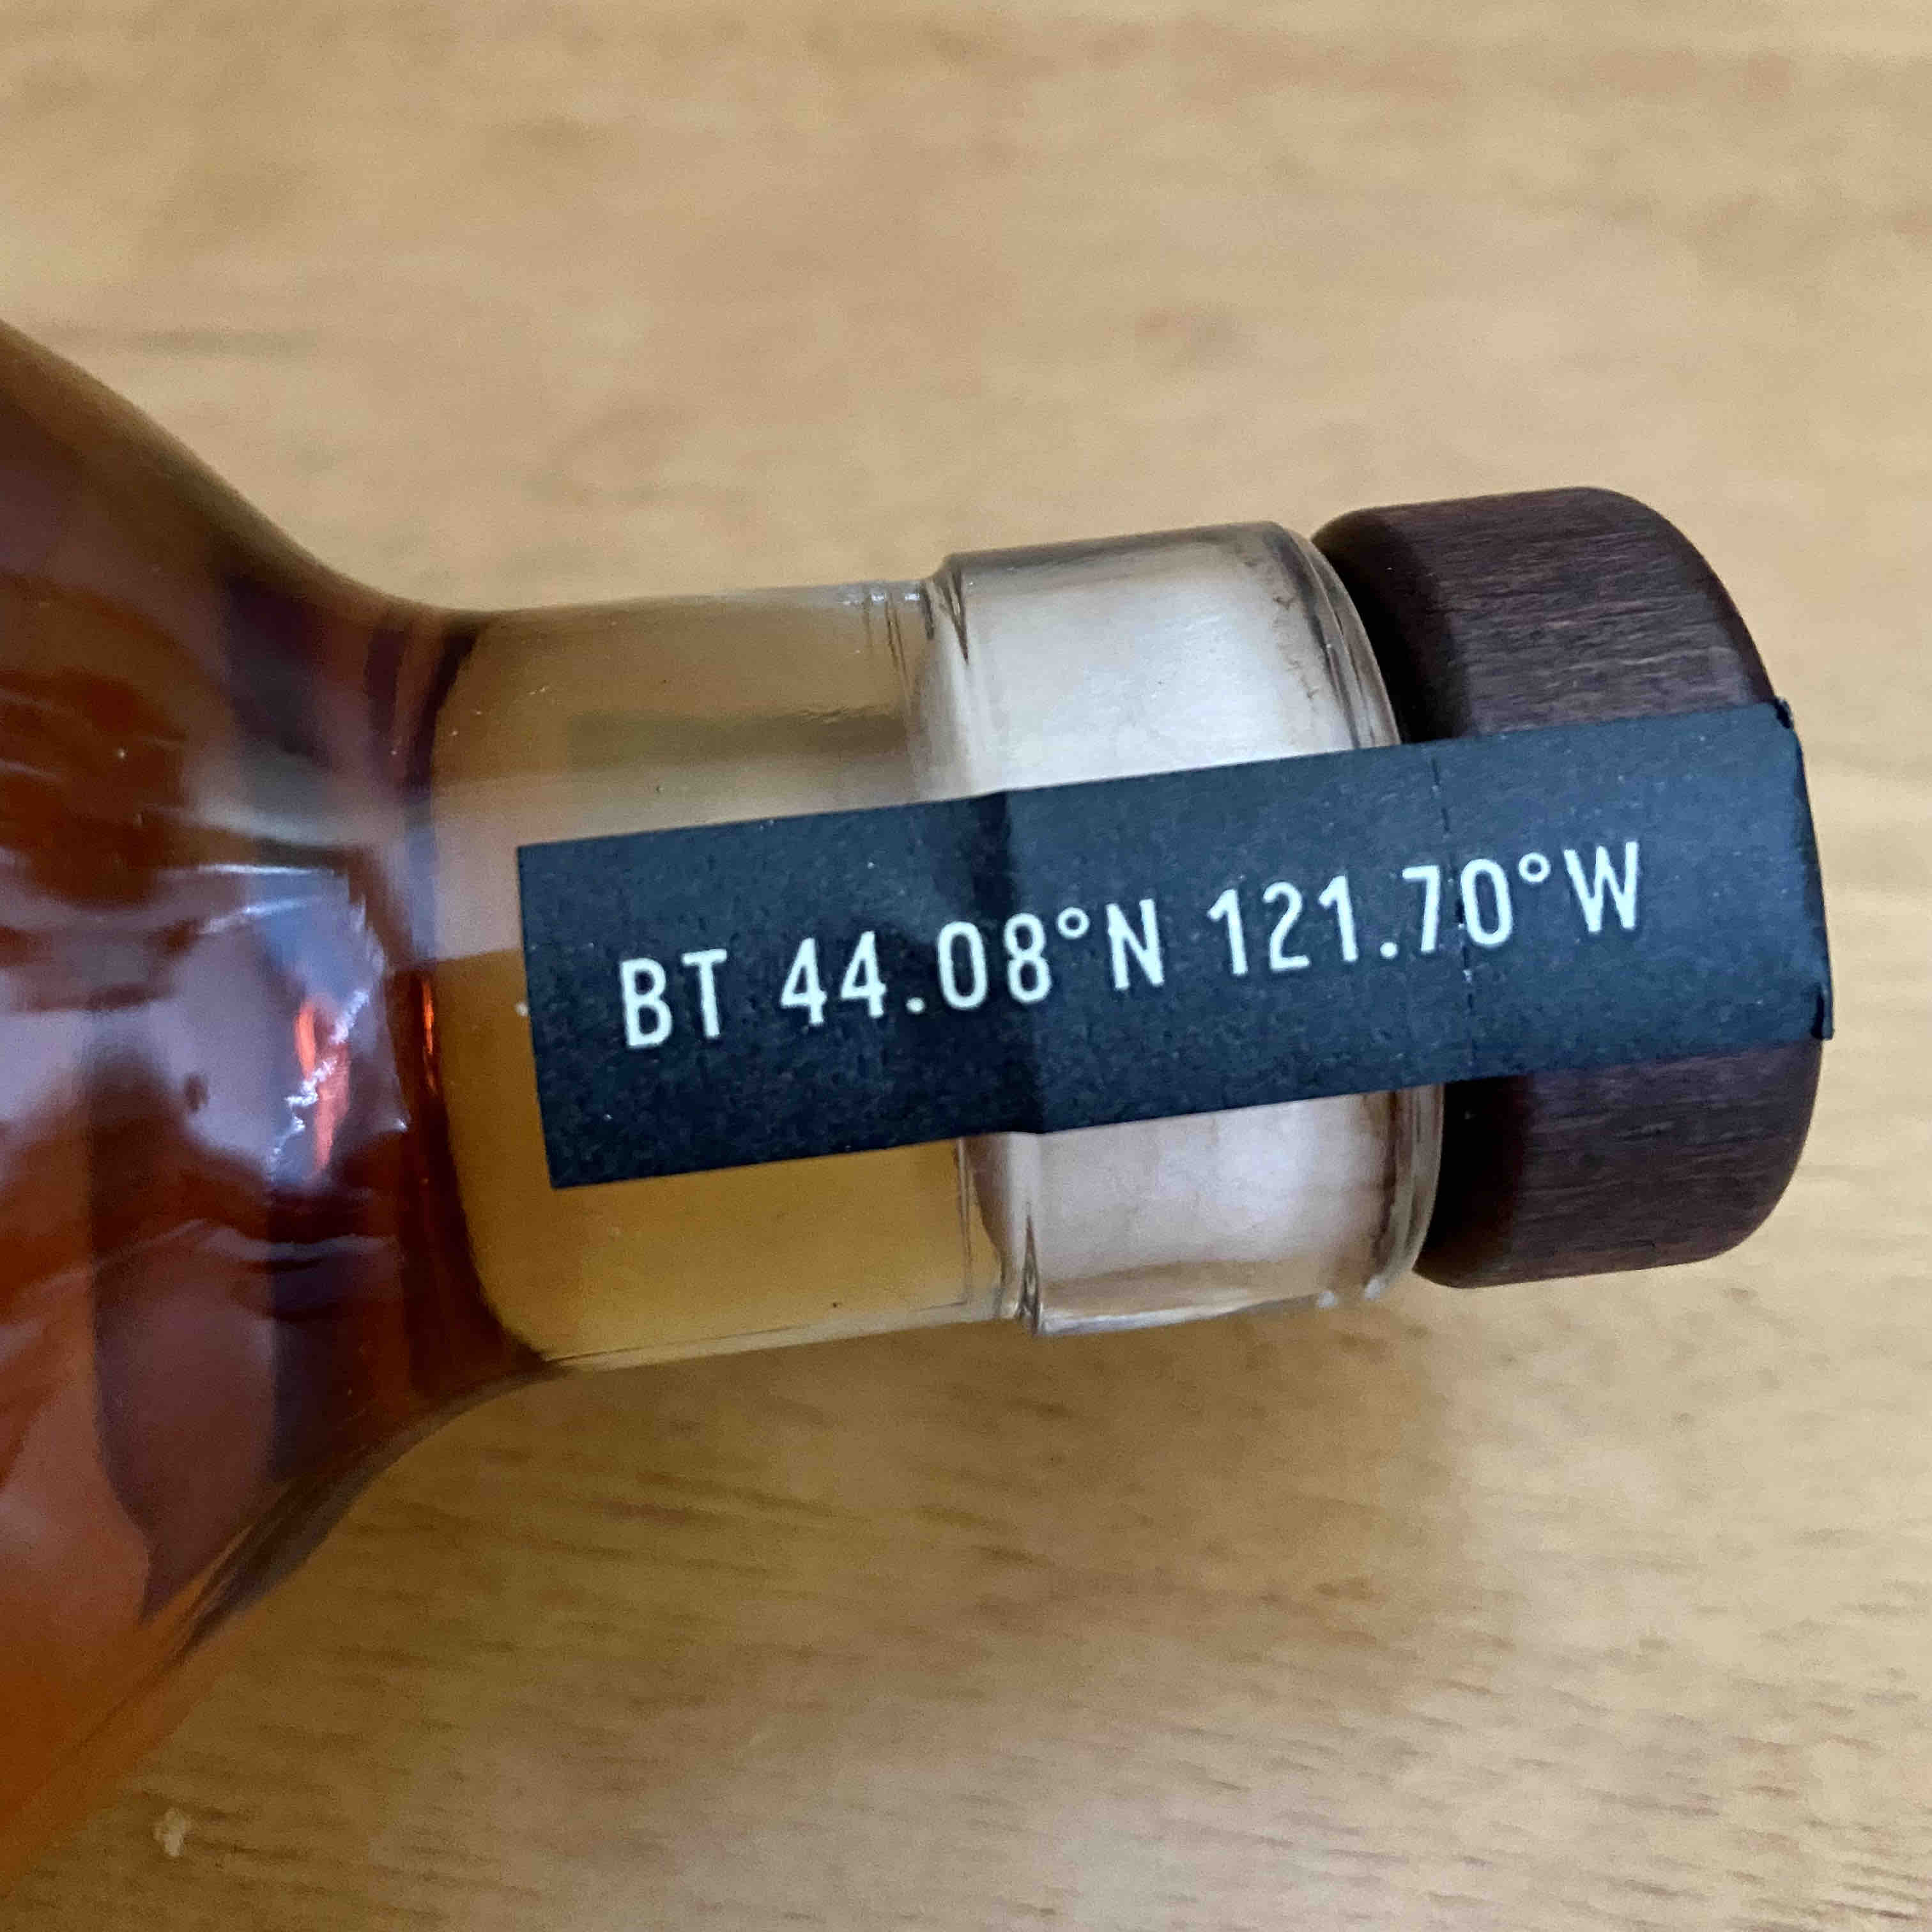 The coordinates of 44.08°N 121.70°W on the tape on the bottle of Broken Top Straight Rye Whiskey lead to Broken Top outside of Sisters, Oregon.